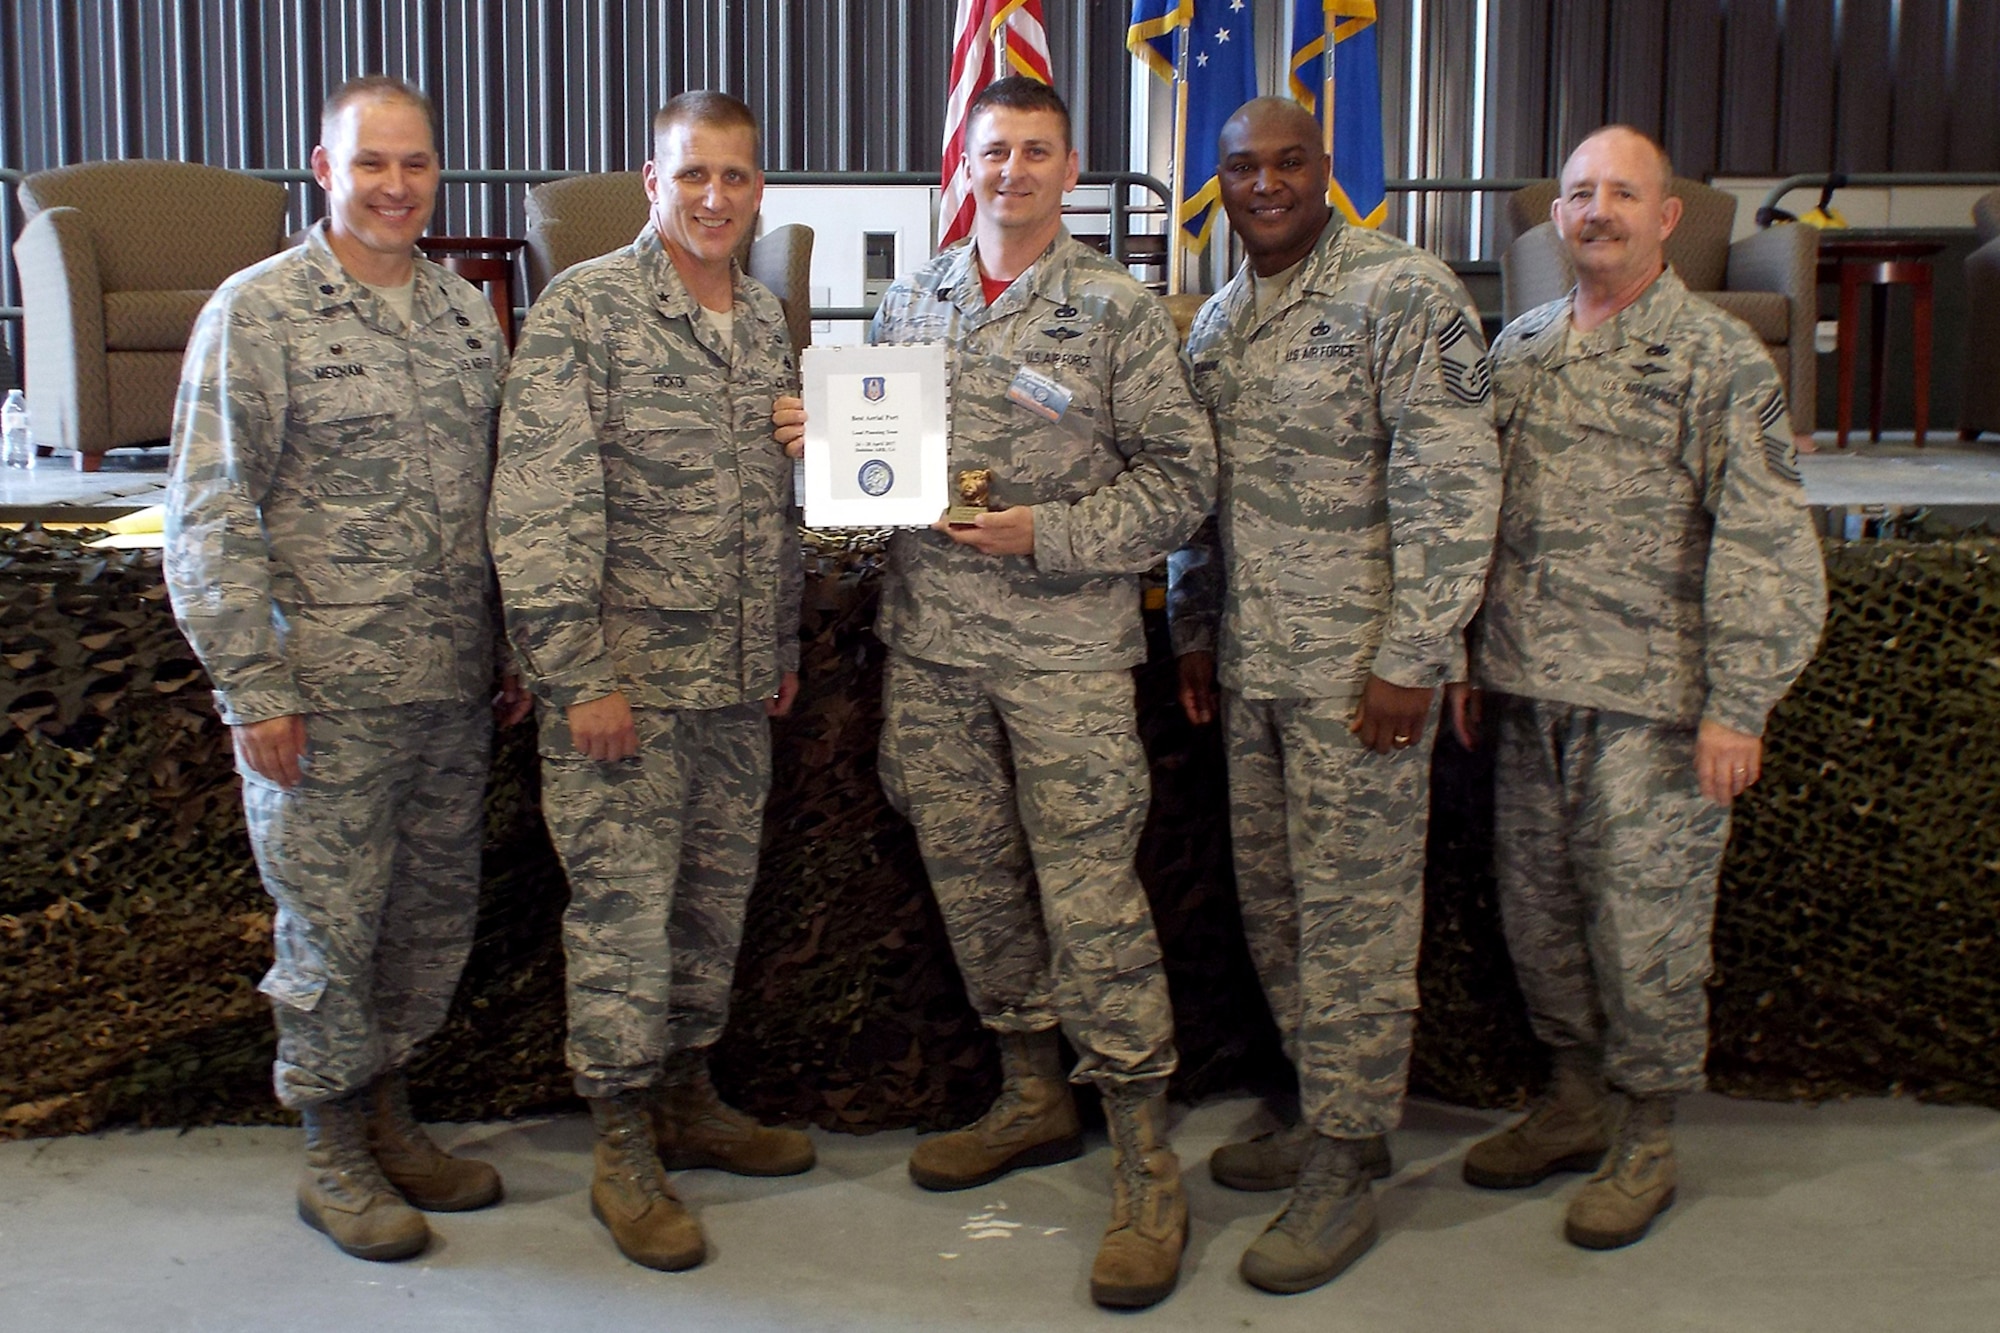 (Left to Right) U.S. Air Force Reserve Lt. Col. Keith Mecham, commander, 67th Aerial Port Squadron, Brig. Gen. John A. Hickok, deputy director of logistics, engineering and force protection, Headquarters Air Force Reserve Command, Master Sgt. Morgan Abner, 96th Aerial Port Squadron, Chief Master Sgt. Darius Drummond, air transportation career field manager, Headquarters Air Force, and Chief Master Sgt. Richard Hiney, Port Dawg Challenge Chief, and superintendent, 27th Aerial Port Squadron, pose for a photo after receiving the award for “Best Load Planning Team” during the 2017 Air Force Reserve Command Port Dawg Challenge awards ceremony April 27, 2017, at Dobbins Air Reserve Base, Ga. Twenty-three teams competed in 12 events over three days to showcase their air transportation skills. (U.S. Air Force photo by Tech. Sgt. Debra Gentry/Released)